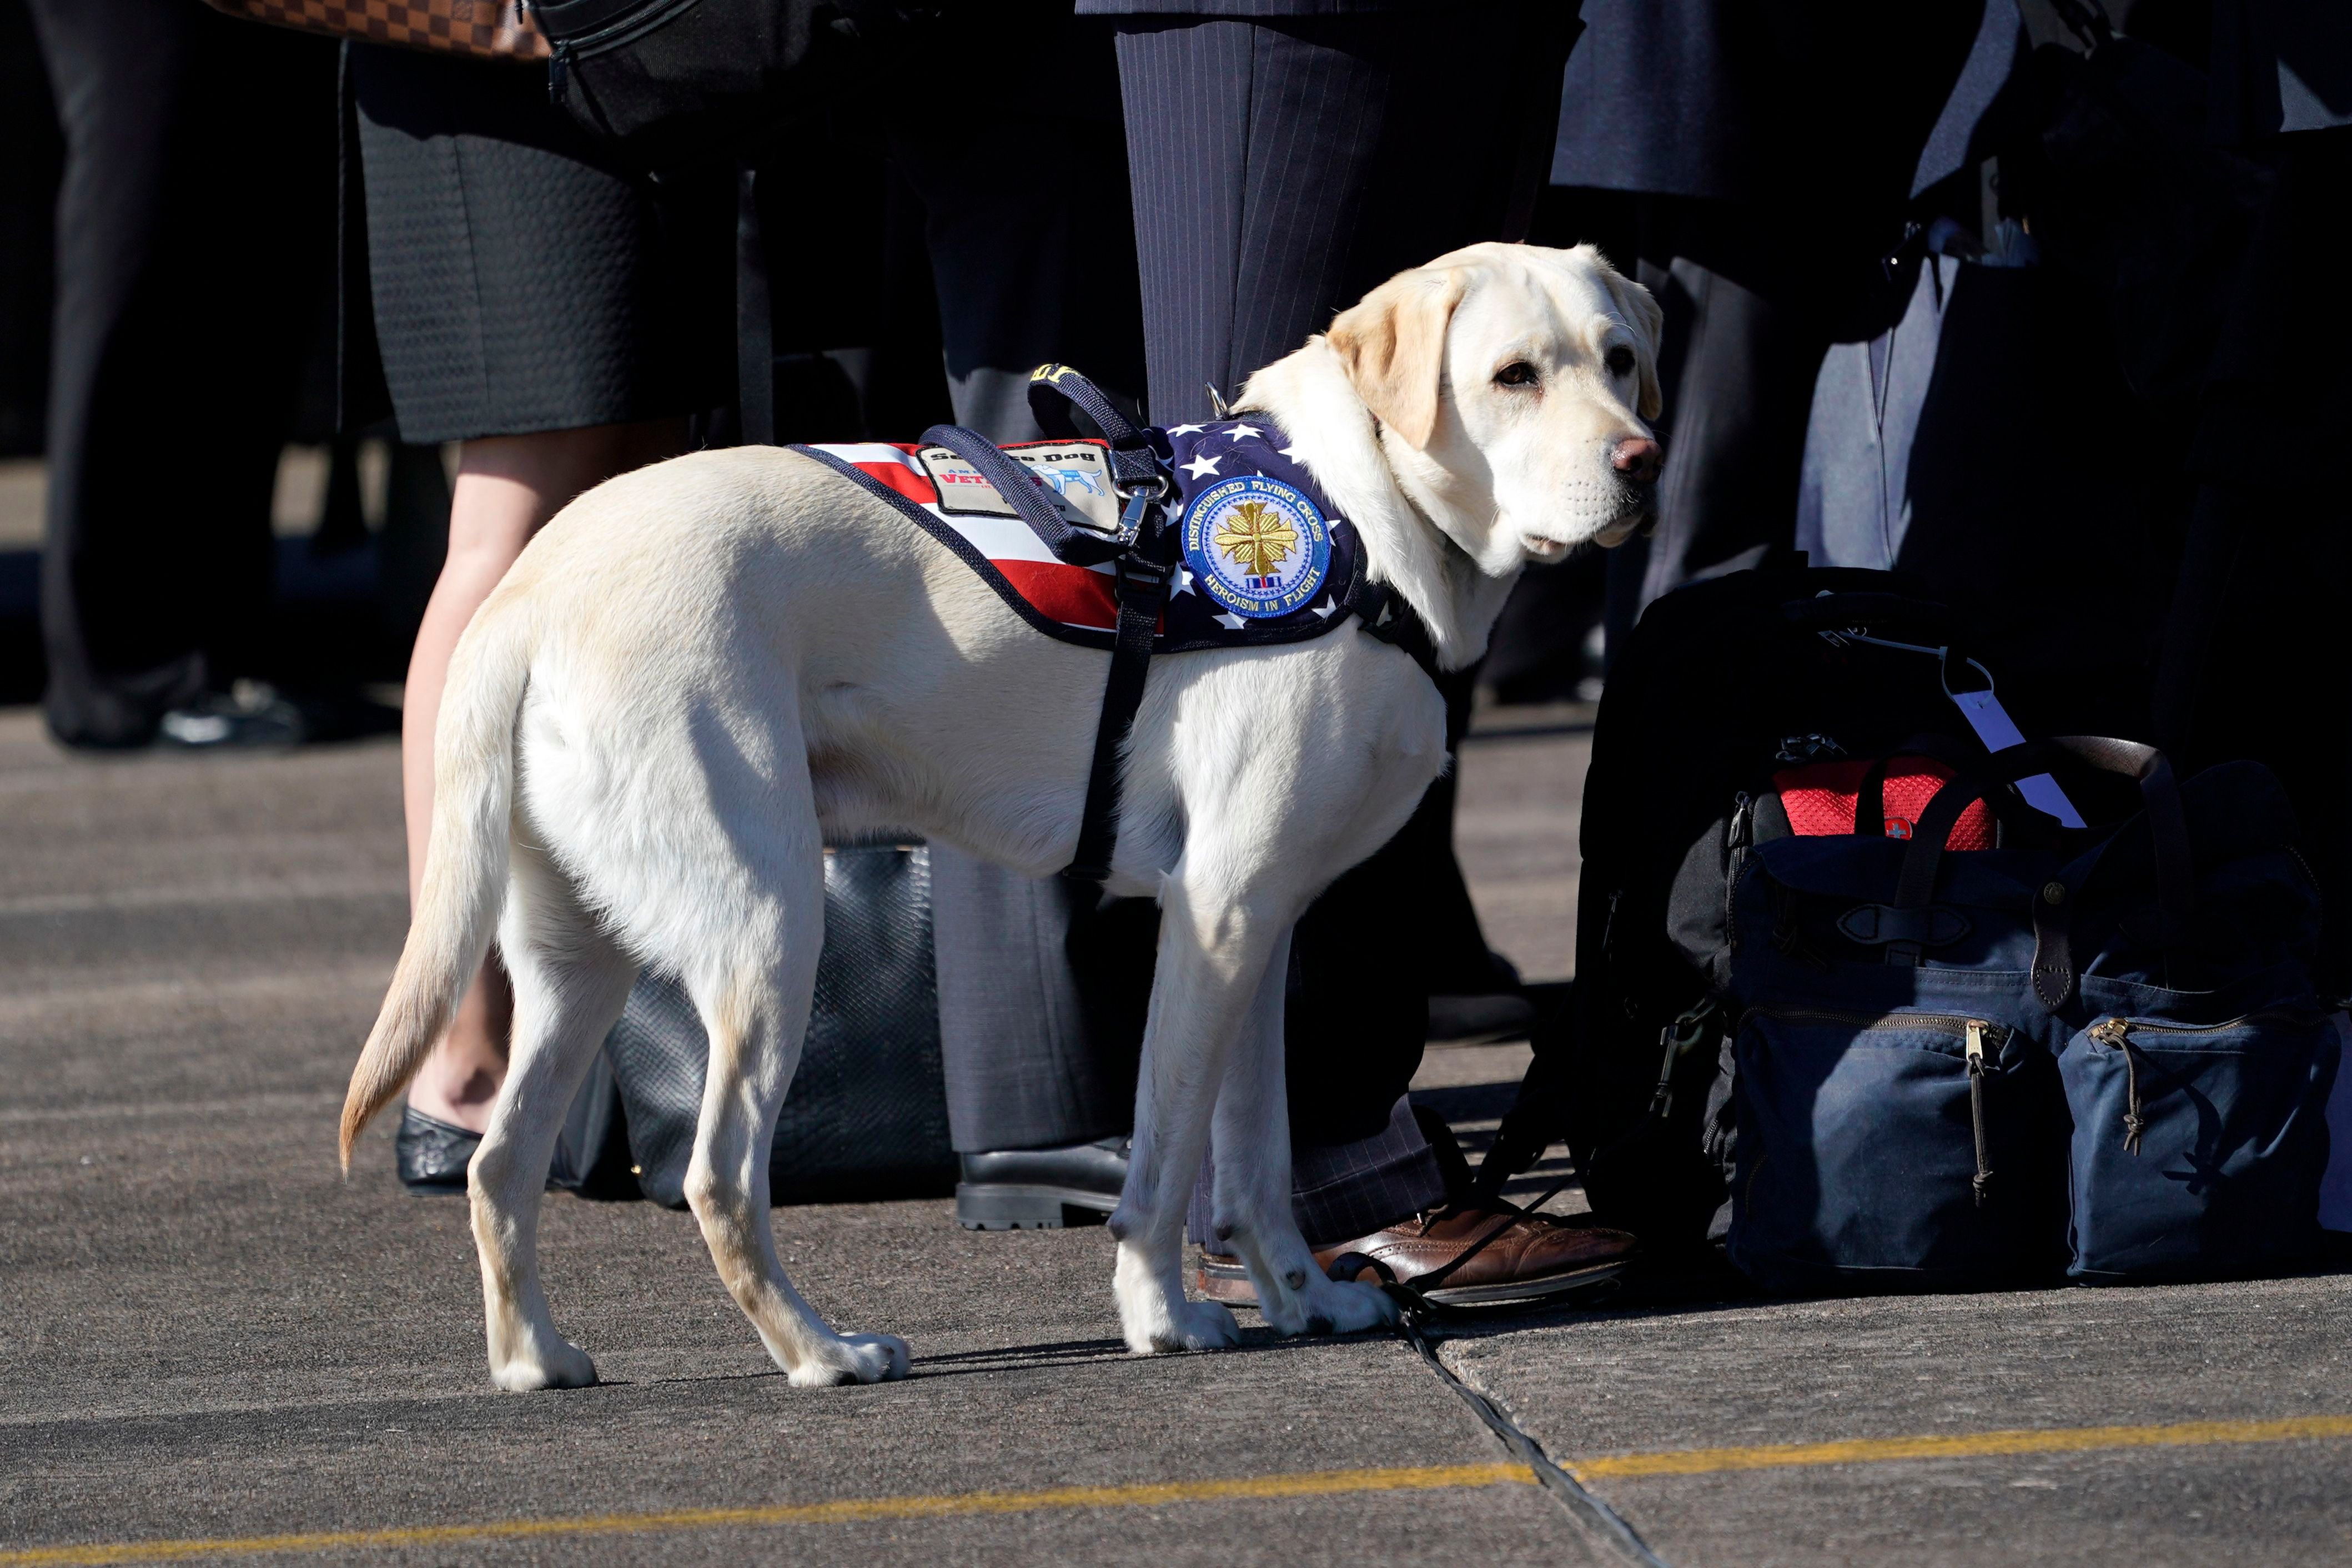 Sully, the yellow Labrador retriever who was former U.S. President George H.W. Bush's service dog, during a departure ceremony at Ellington Field in Houston, Texas, on Dec. 3, 2018. (David J Phillip/POOL/EPA-EFE/REX/Shutterstock—David J Phillip/POOL/EPA-EFE/REX/Shutterstock)